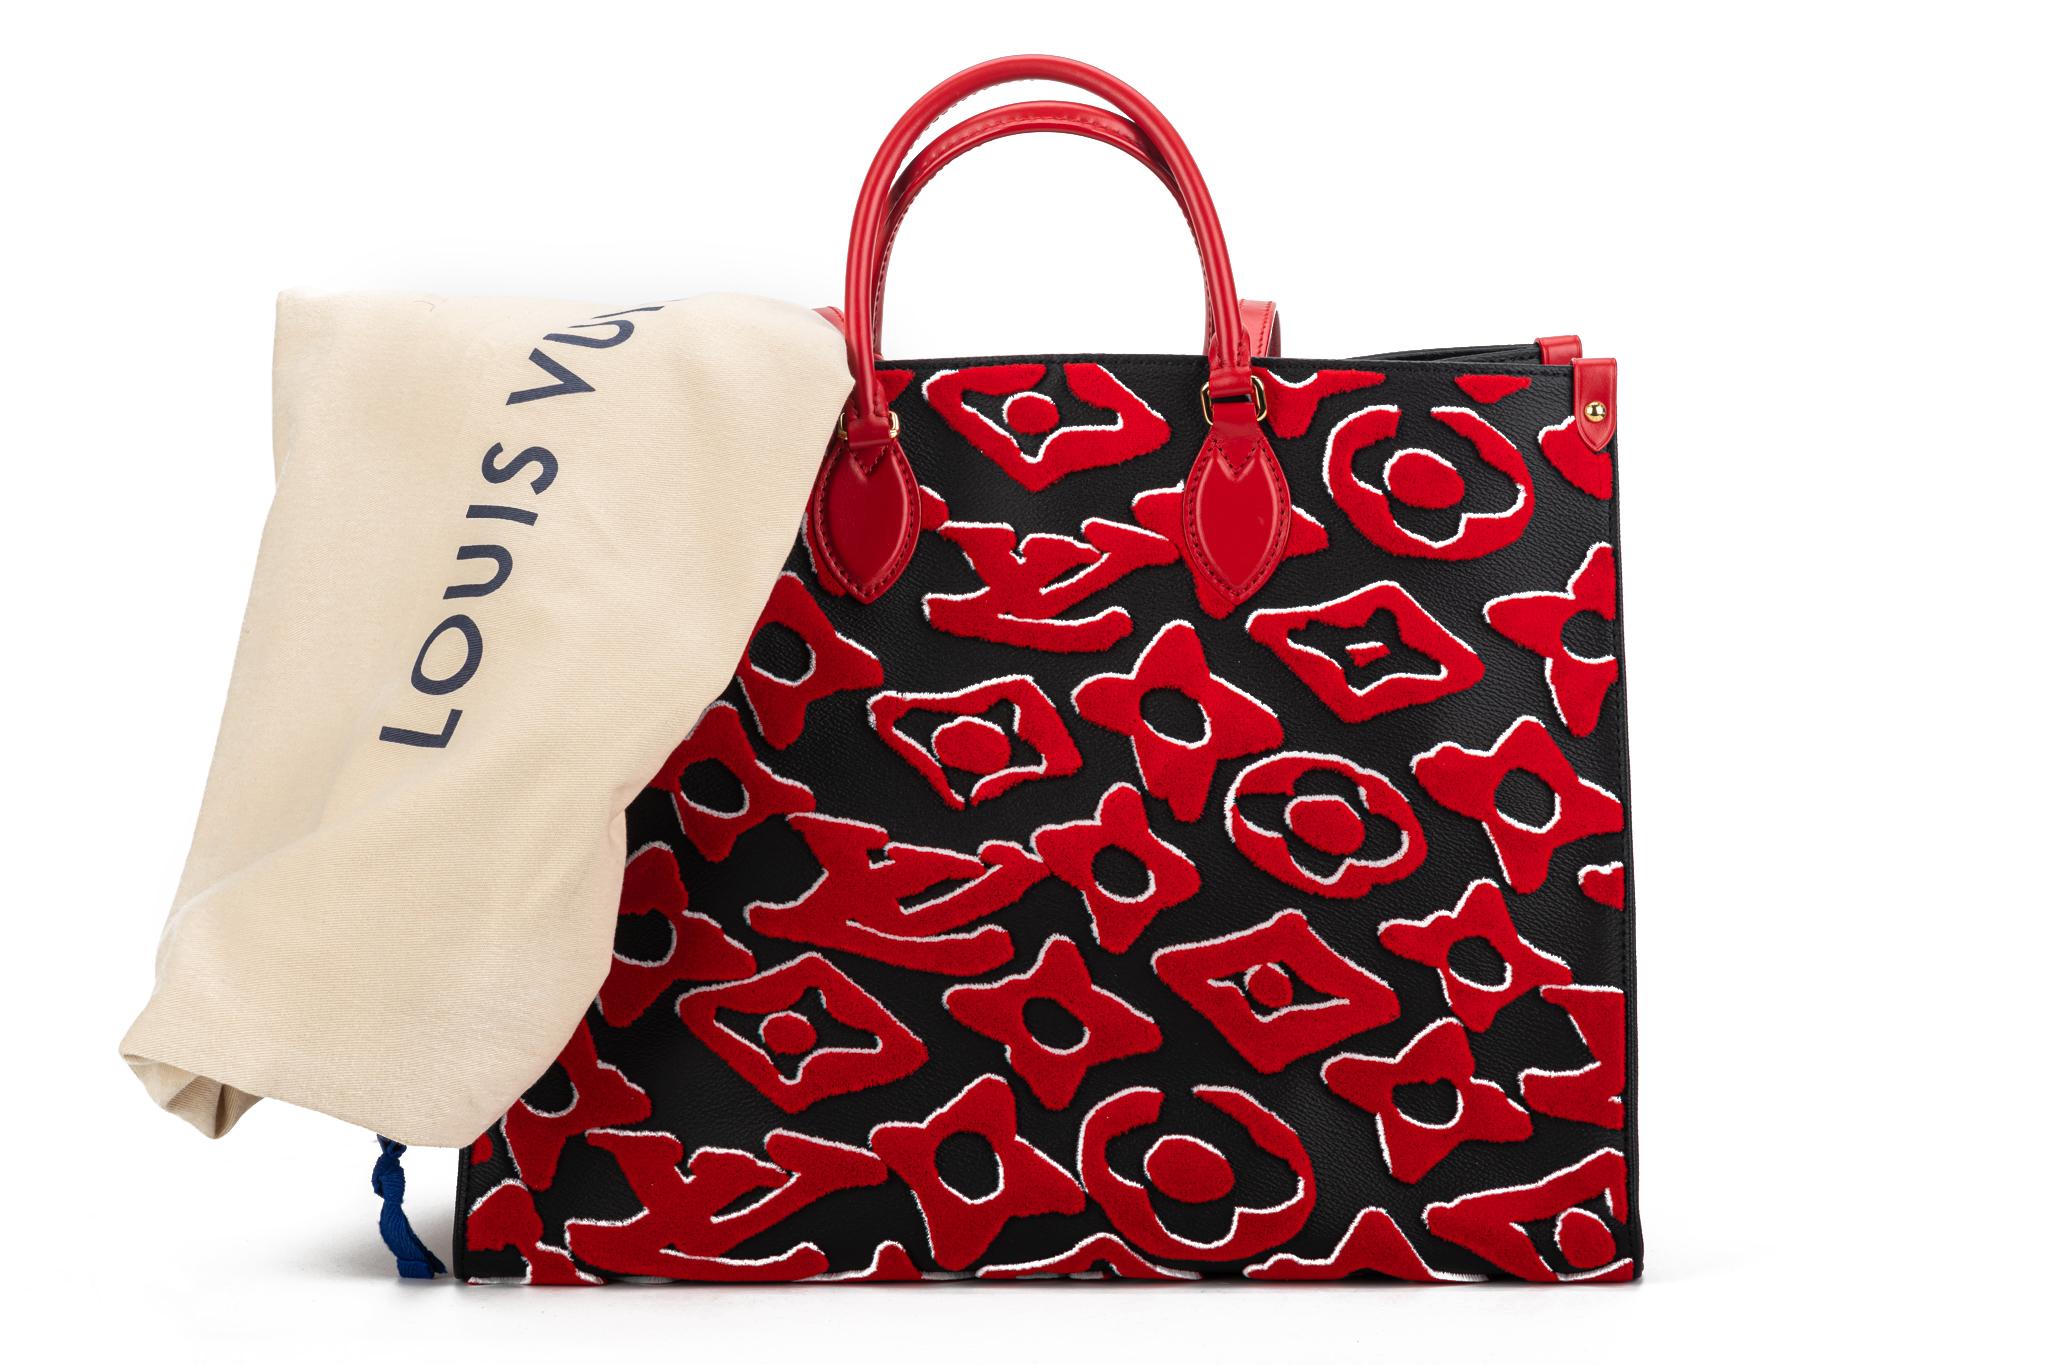 This limited edition tote is crafted of oversized Louis Vuitton monogram compose in red on black coated canvas. Special edition by Urs Fischer .The bag features red rolled top handles (4.25' drop), and matching shoulder straps (11.75' drop) that can